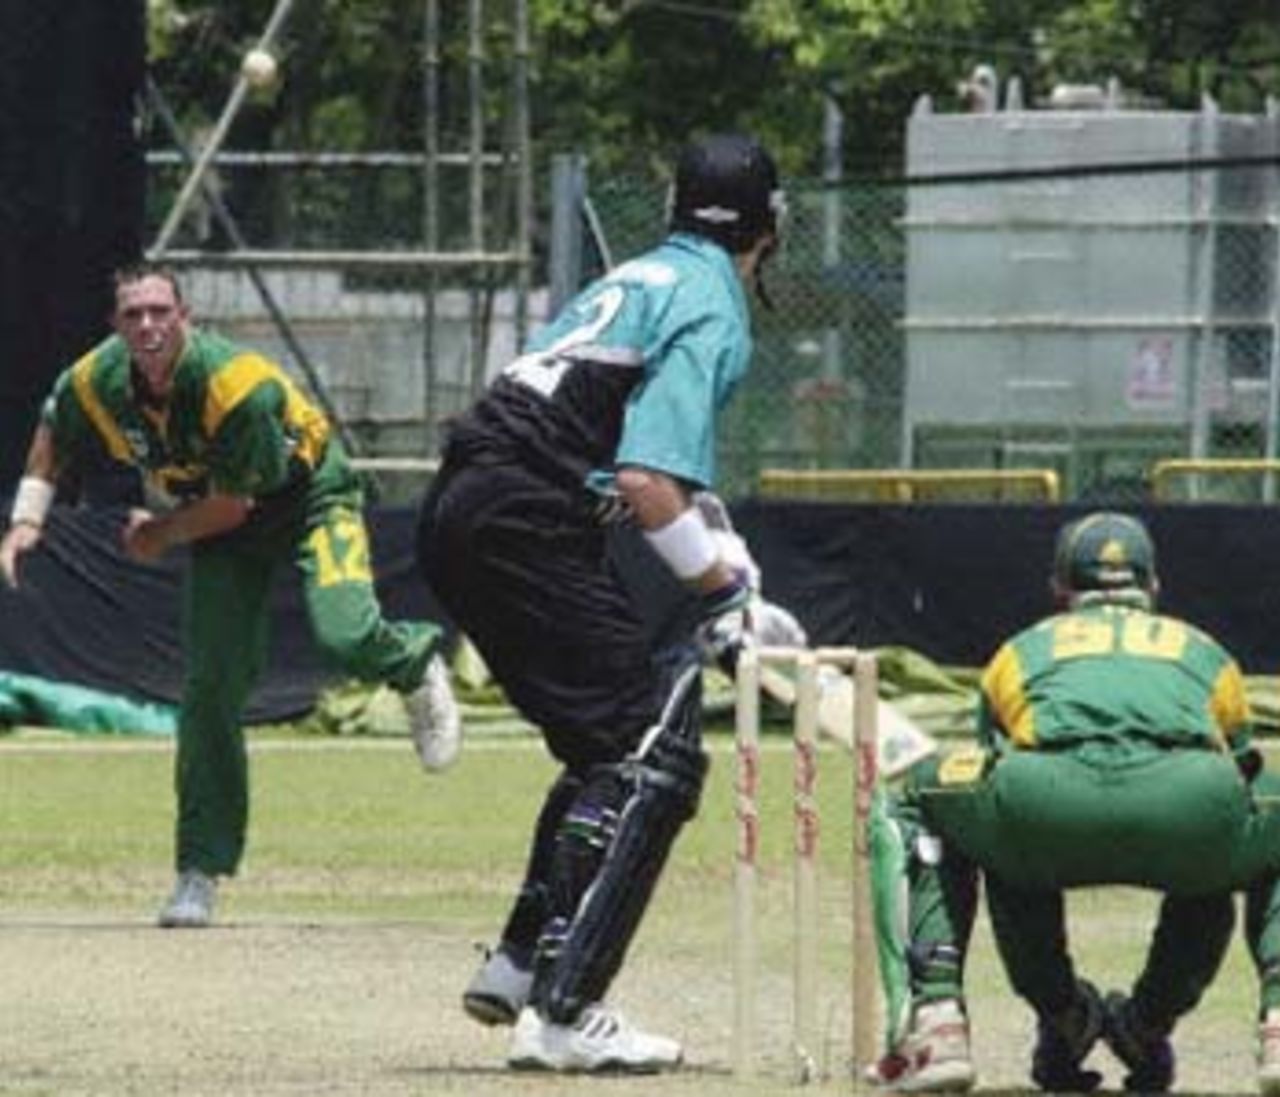 South African bowler, Nicky Boje (L), bowls to New Zealand batsman, Paul Wiseman (C), as South African wicketkeeper, Shaun Pollock, appears ready for a catch, during the Singapore Challenge 2000 cricket triangular in Singapore. South Africa made their way into a prime position as they dismissed New Zealand for 158 in the deciting match to find the second finalist of the tournament. Godrej Singapore Challenge, 2000/01, 3rd Match, New Zealand v South Africa, Kallang Ground, Singapore 25 August 2000.